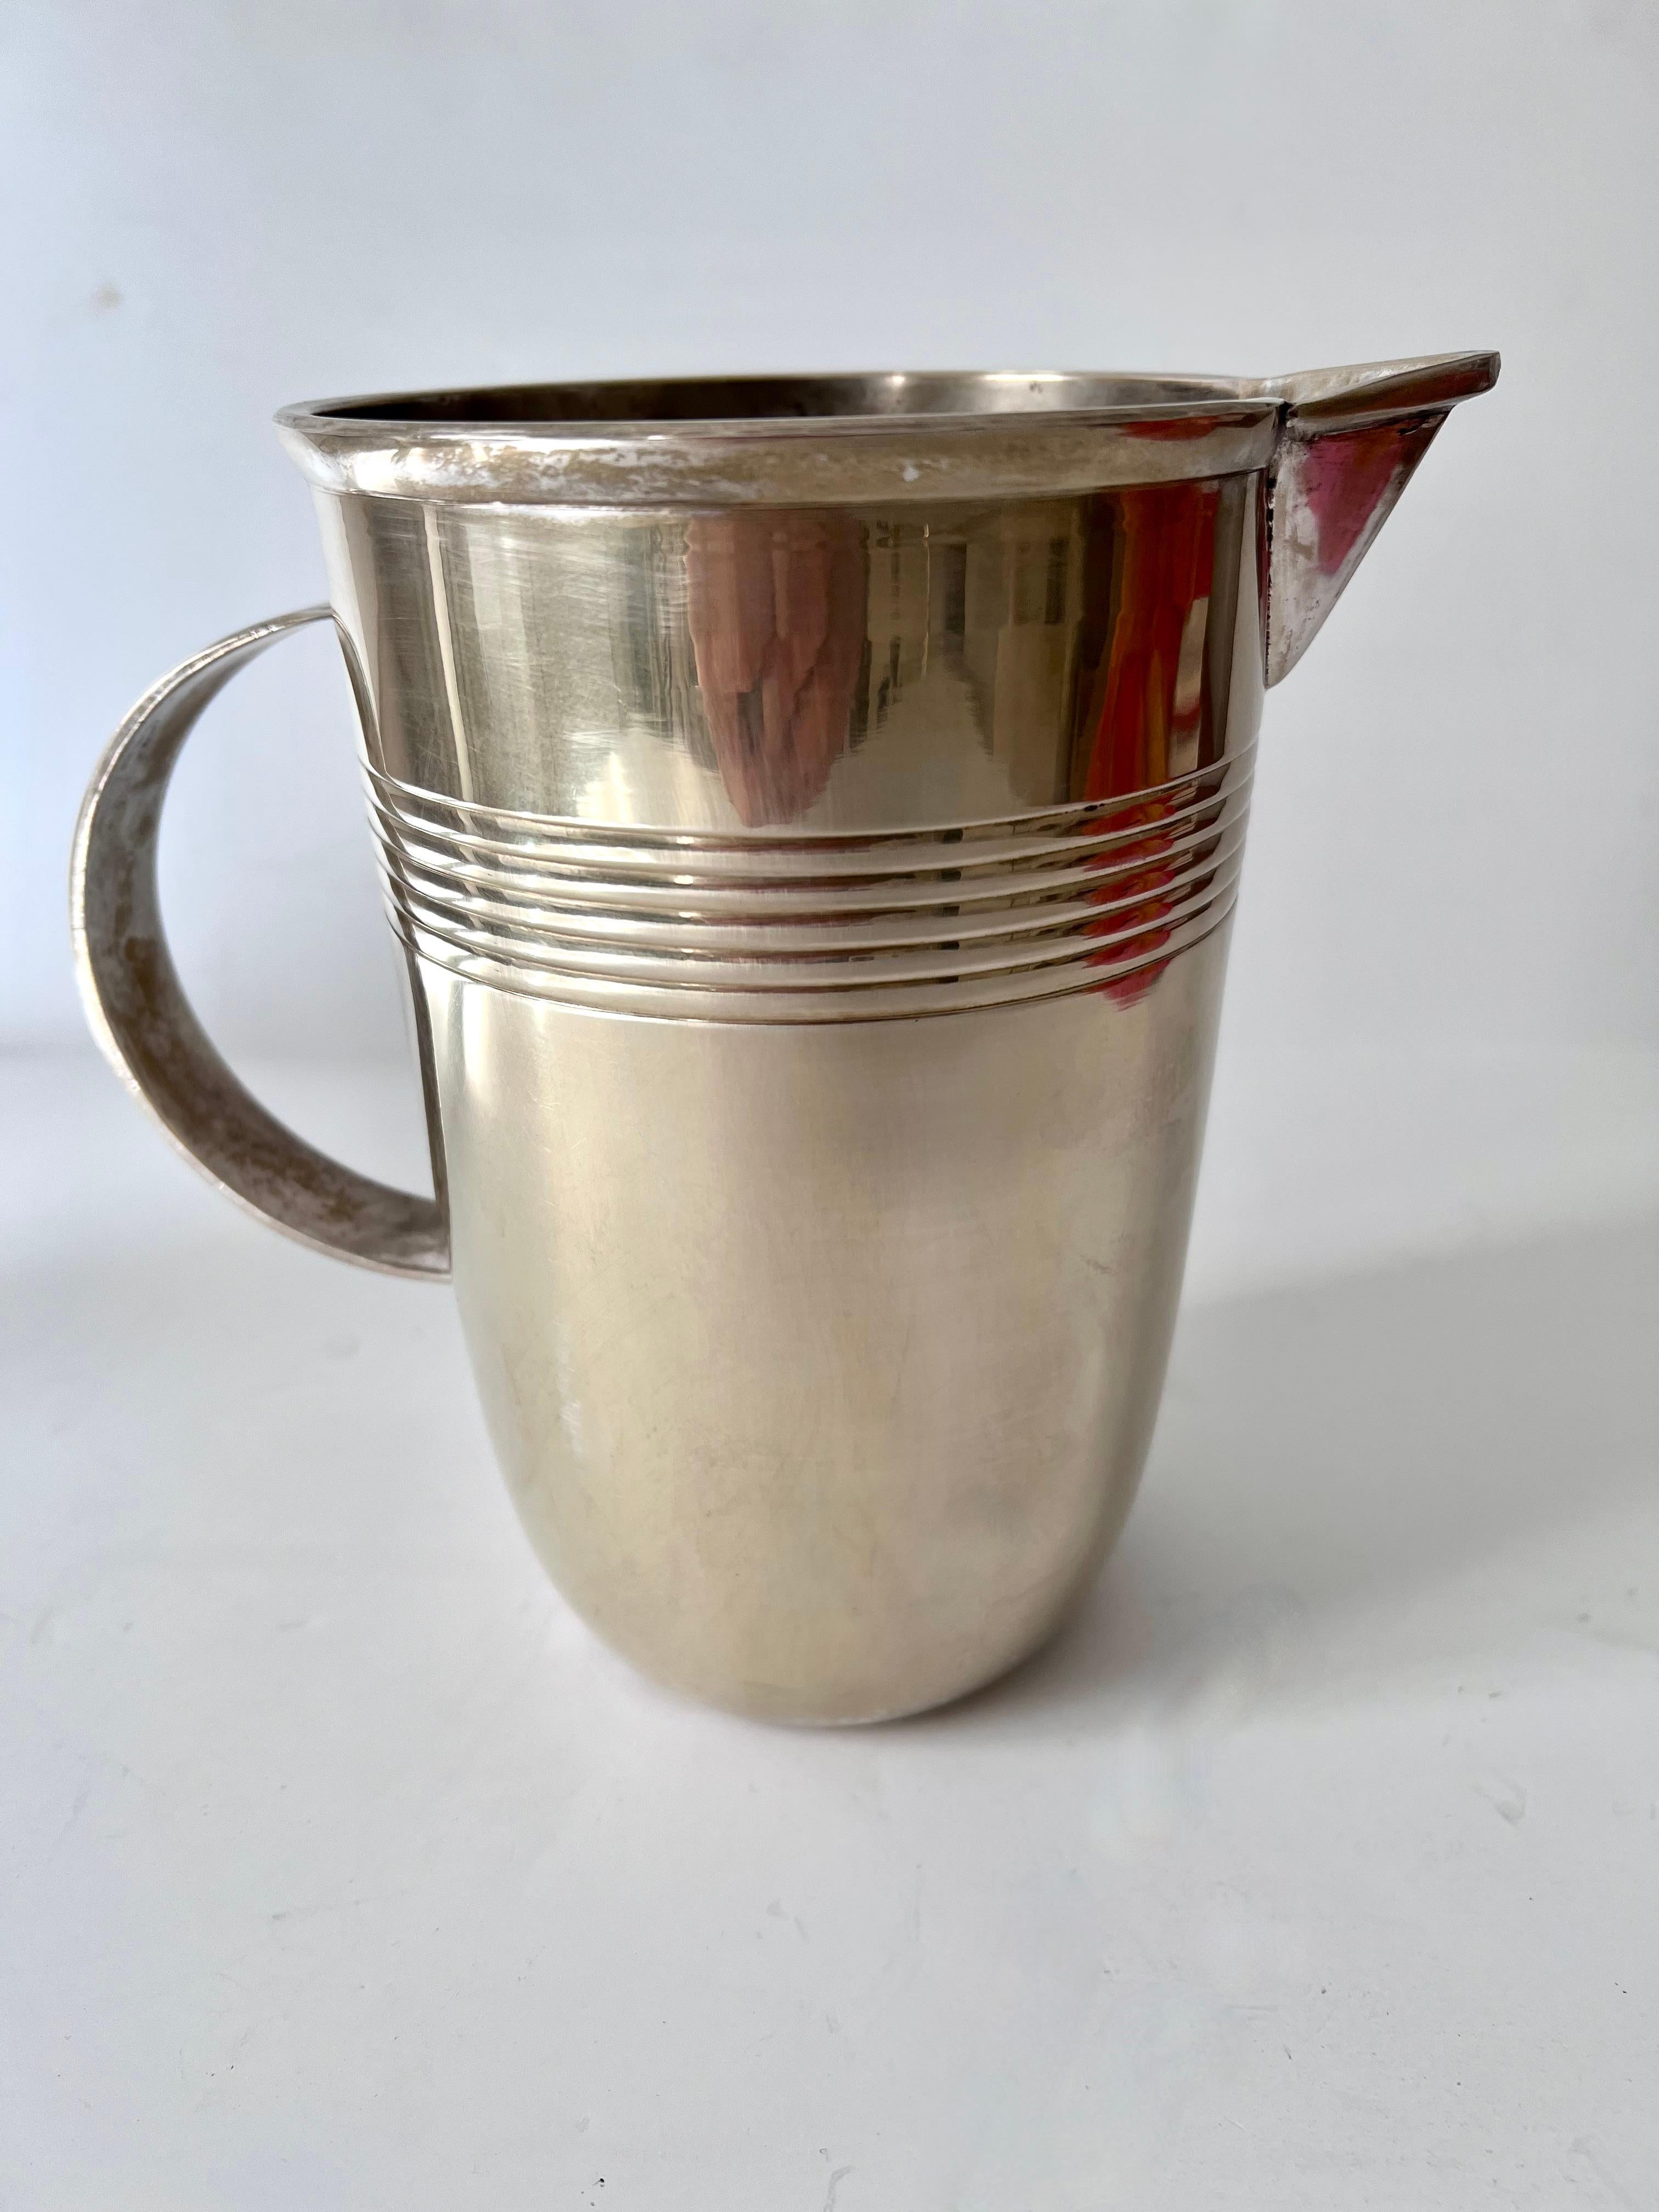 Acquired in Paris France, an early 20th century cocktail pitcher or Juice Pitcher. A Beautifully moderne design that compliments any bar or cocktail station. A lovely piece with Art Deco details.